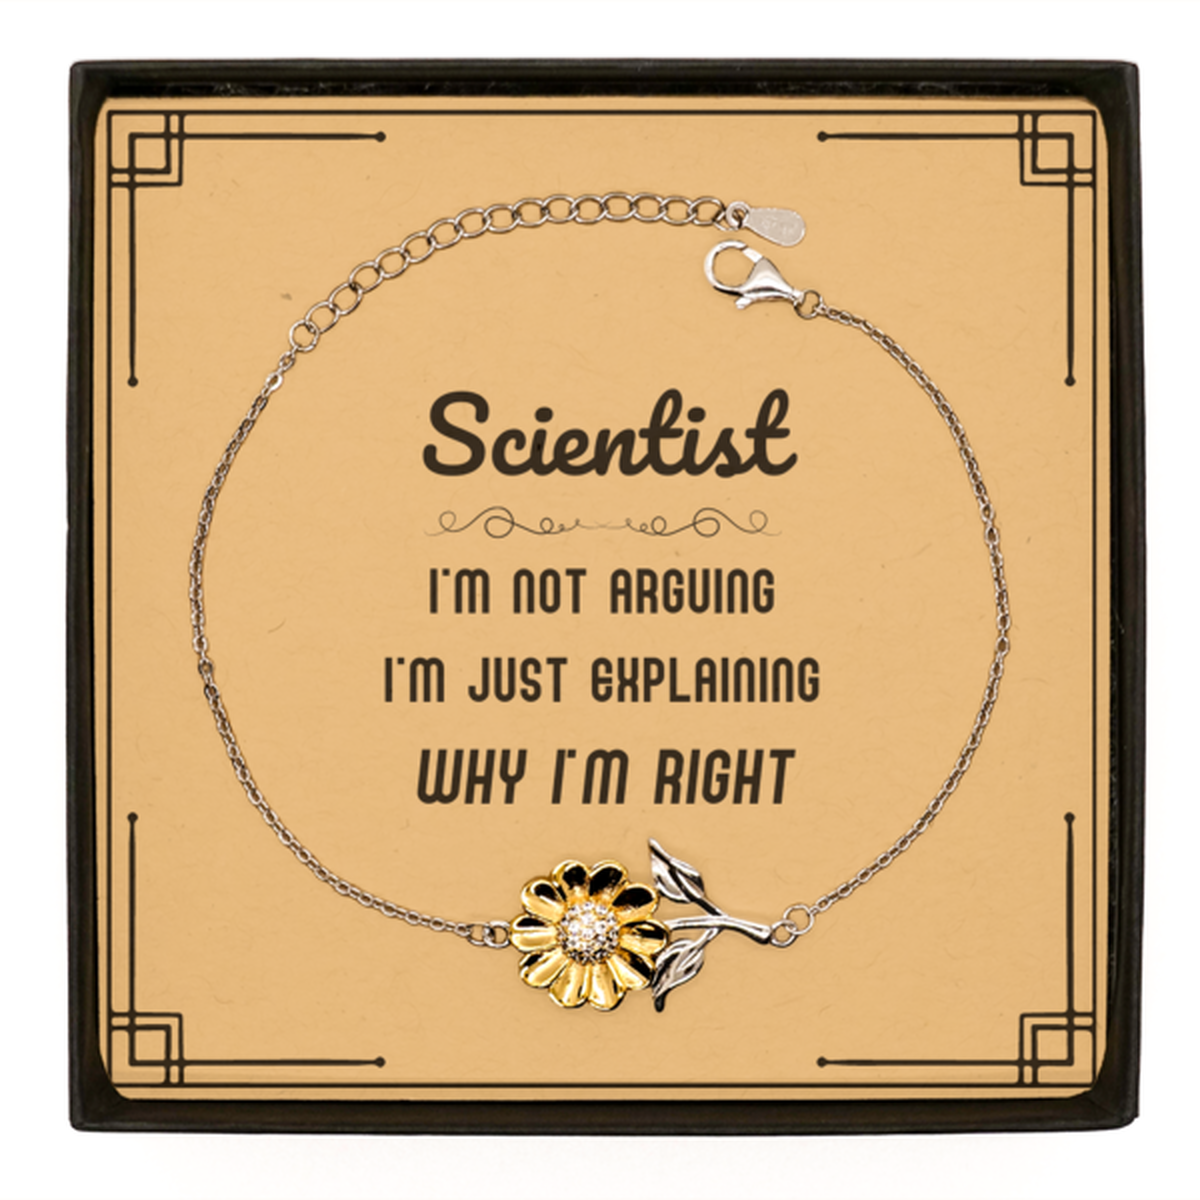 Scientist I'm not Arguing. I'm Just Explaining Why I'm RIGHT Sunflower Bracelet, Funny Saying Quote Scientist Gifts For Scientist Message Card Graduation Birthday Christmas Gifts for Men Women Coworker